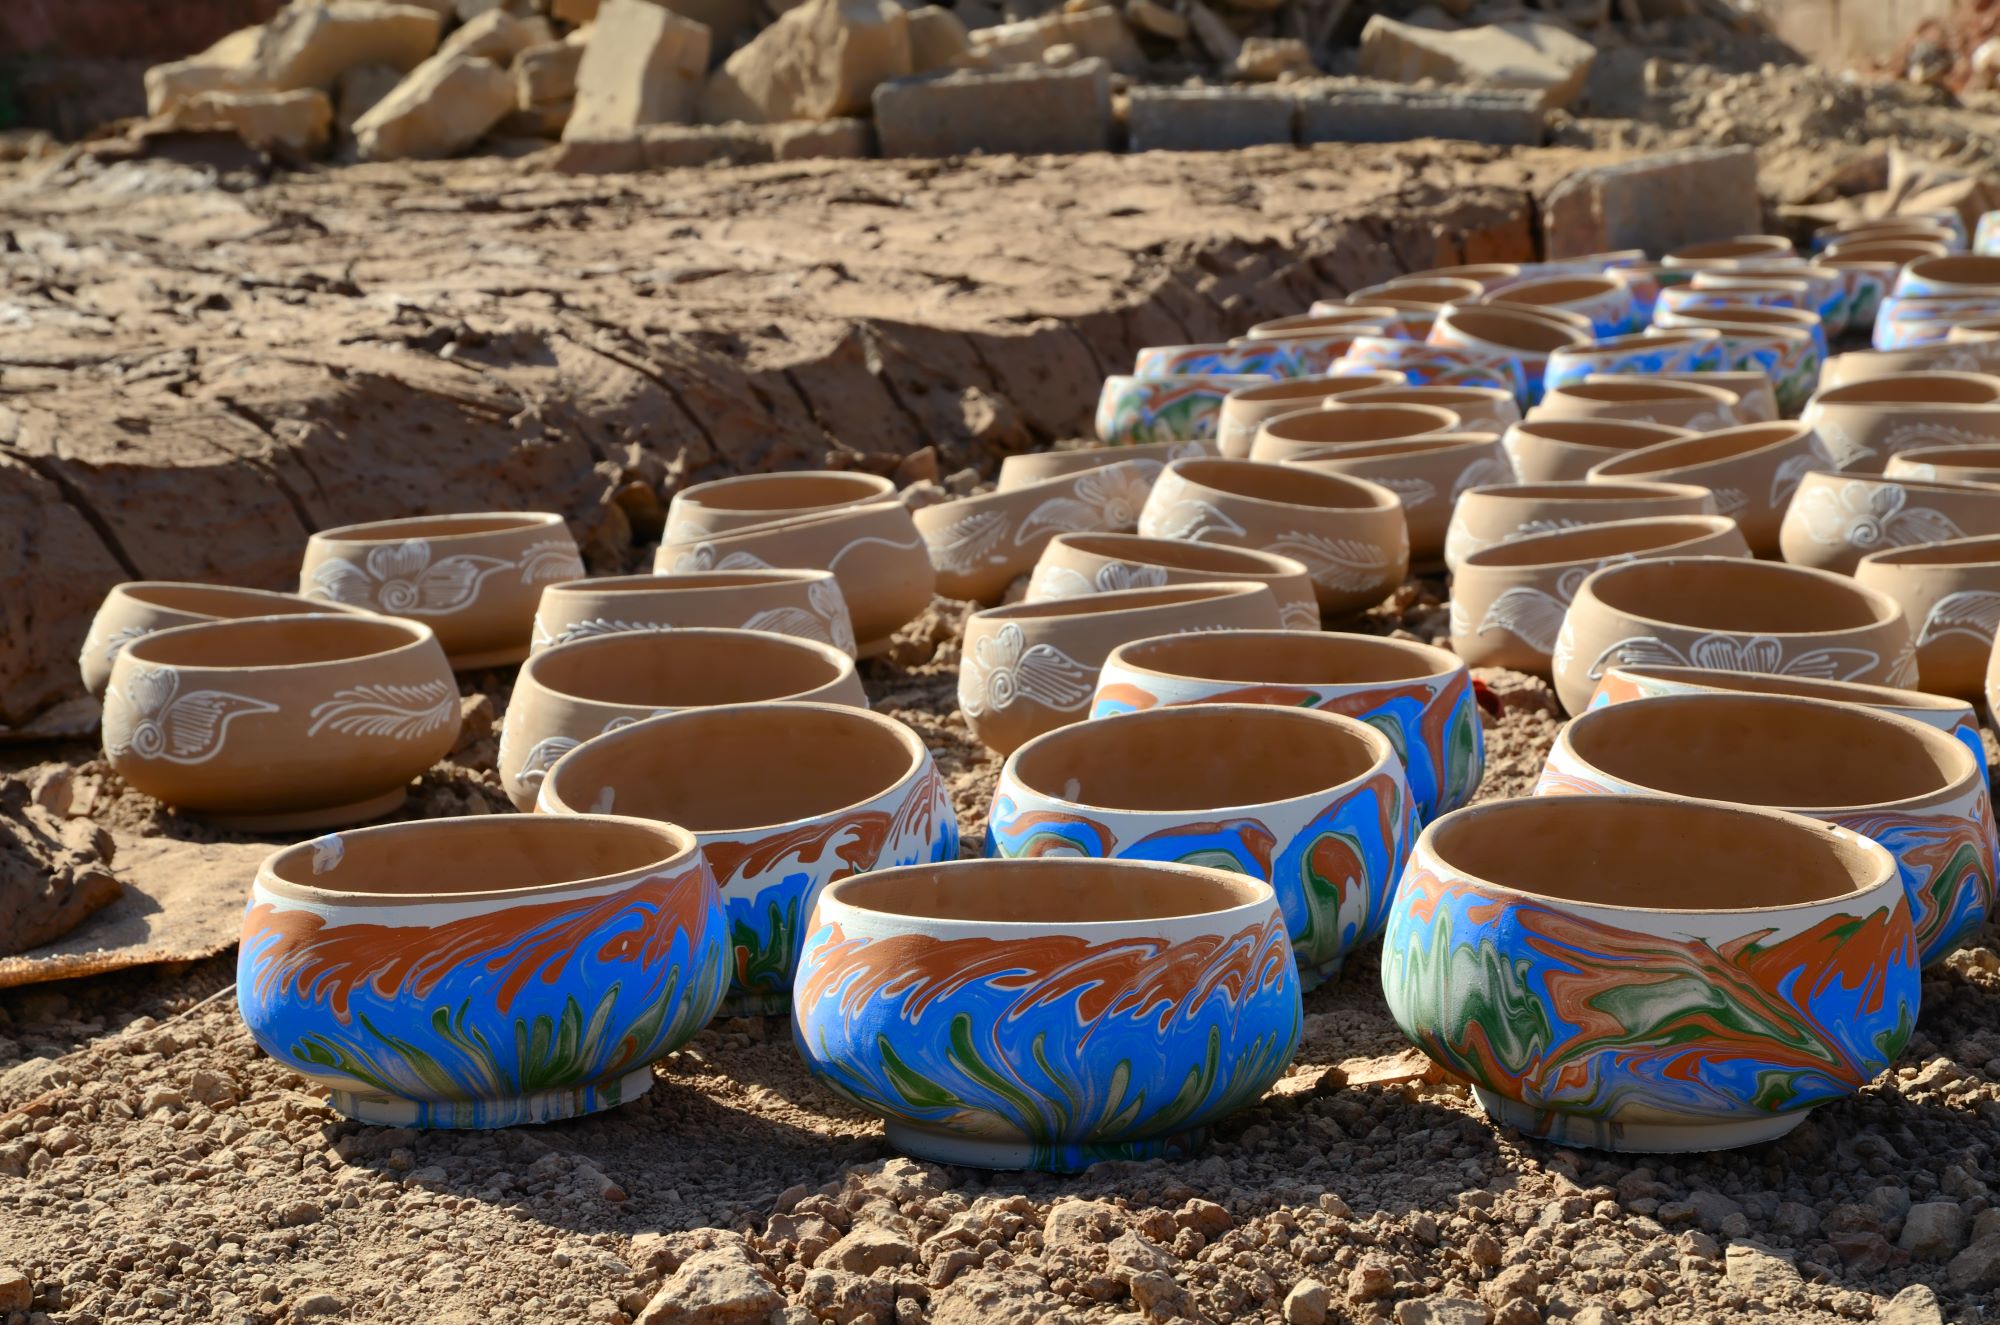 Clay factory and handmade pottery in Marrakesh, Morocco